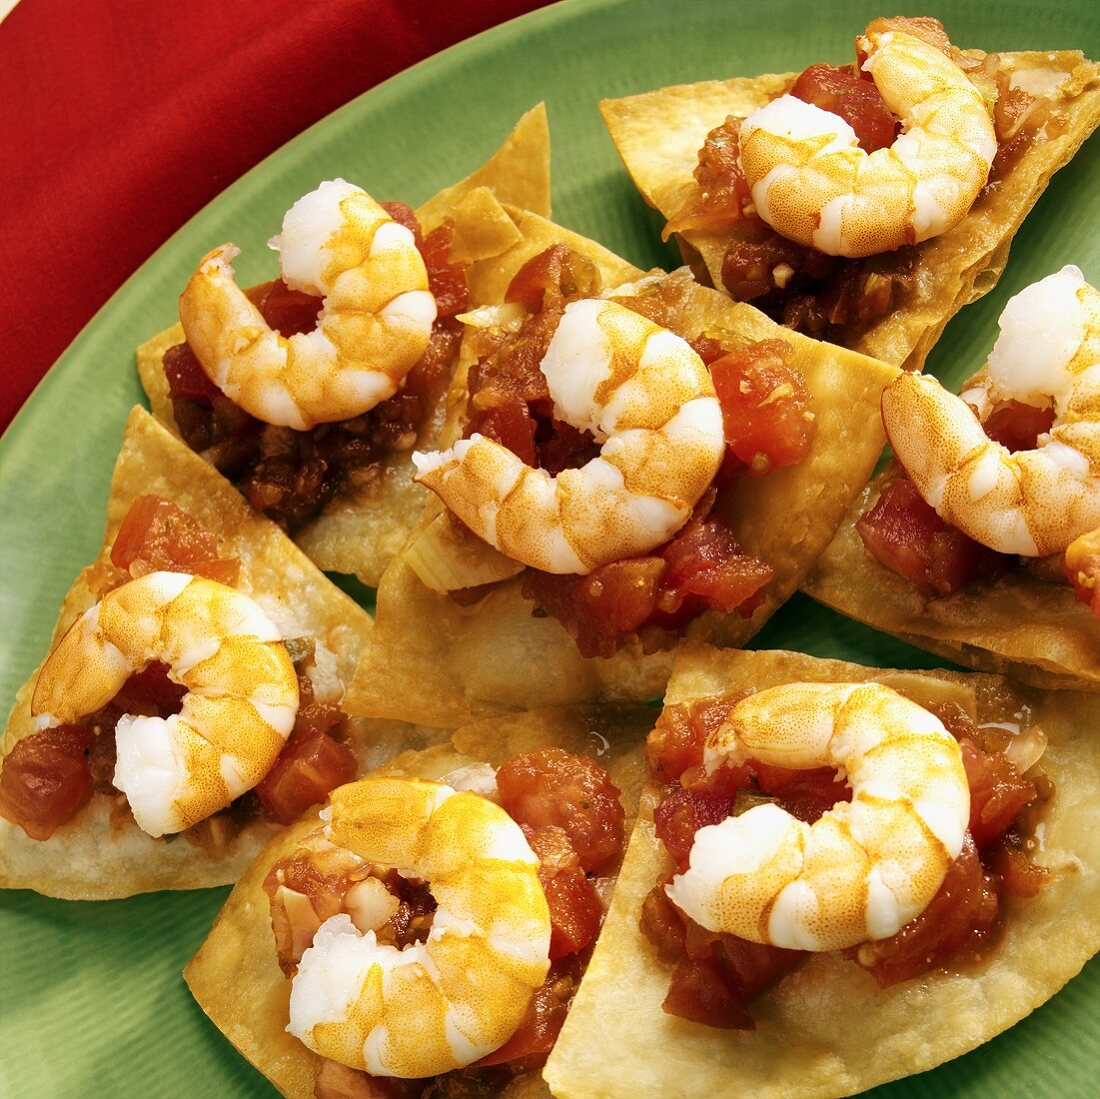 Shrimps and tomato salsa on tortilla chips